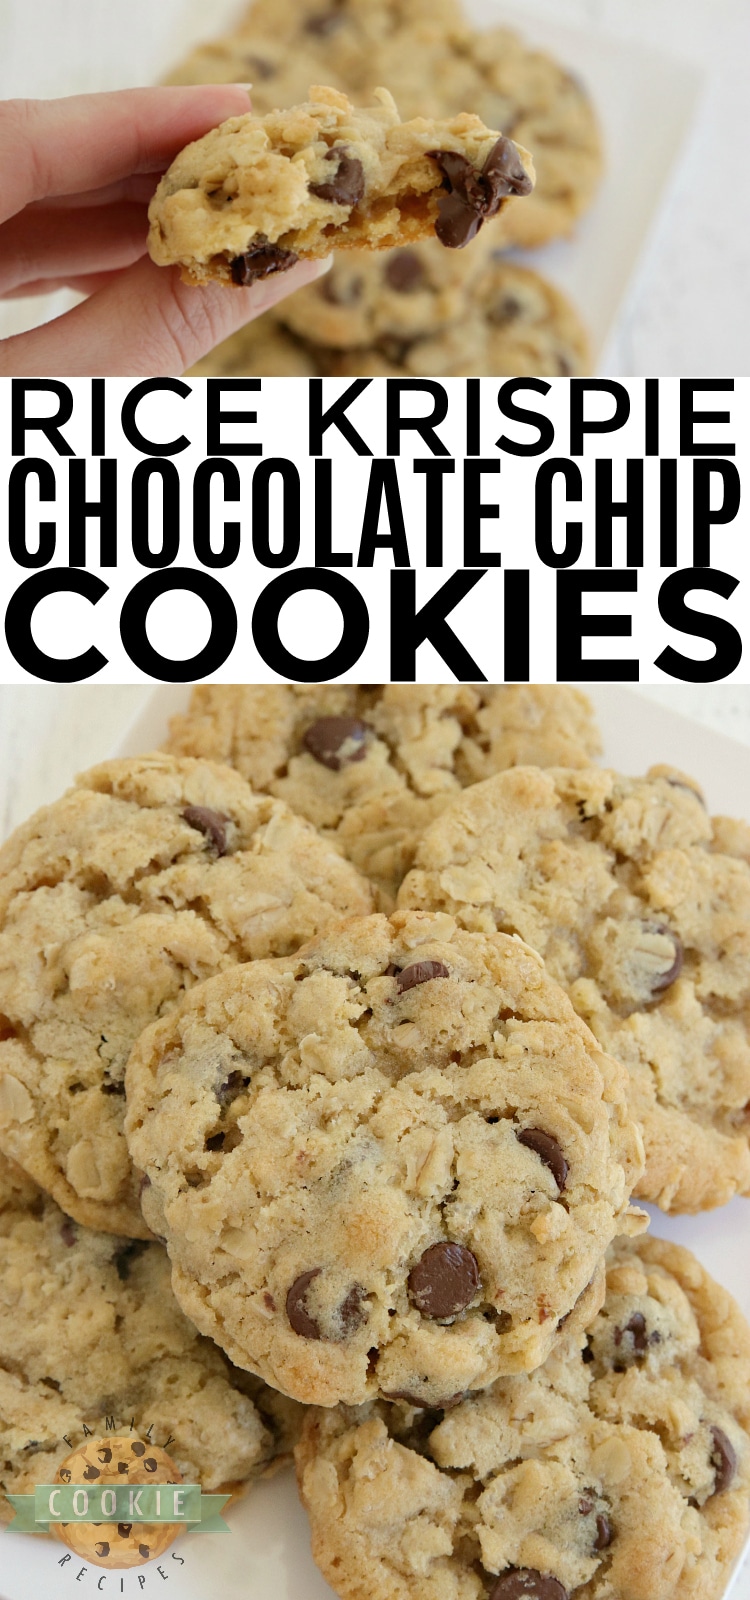 Rice Krispie Chocolate Chip Cookies are soft, chewy and have a little extra crunch! Adding rice krispie cereal to chocolate chip cookies is such a good idea - you'll never want to eat them without that extra addition again!